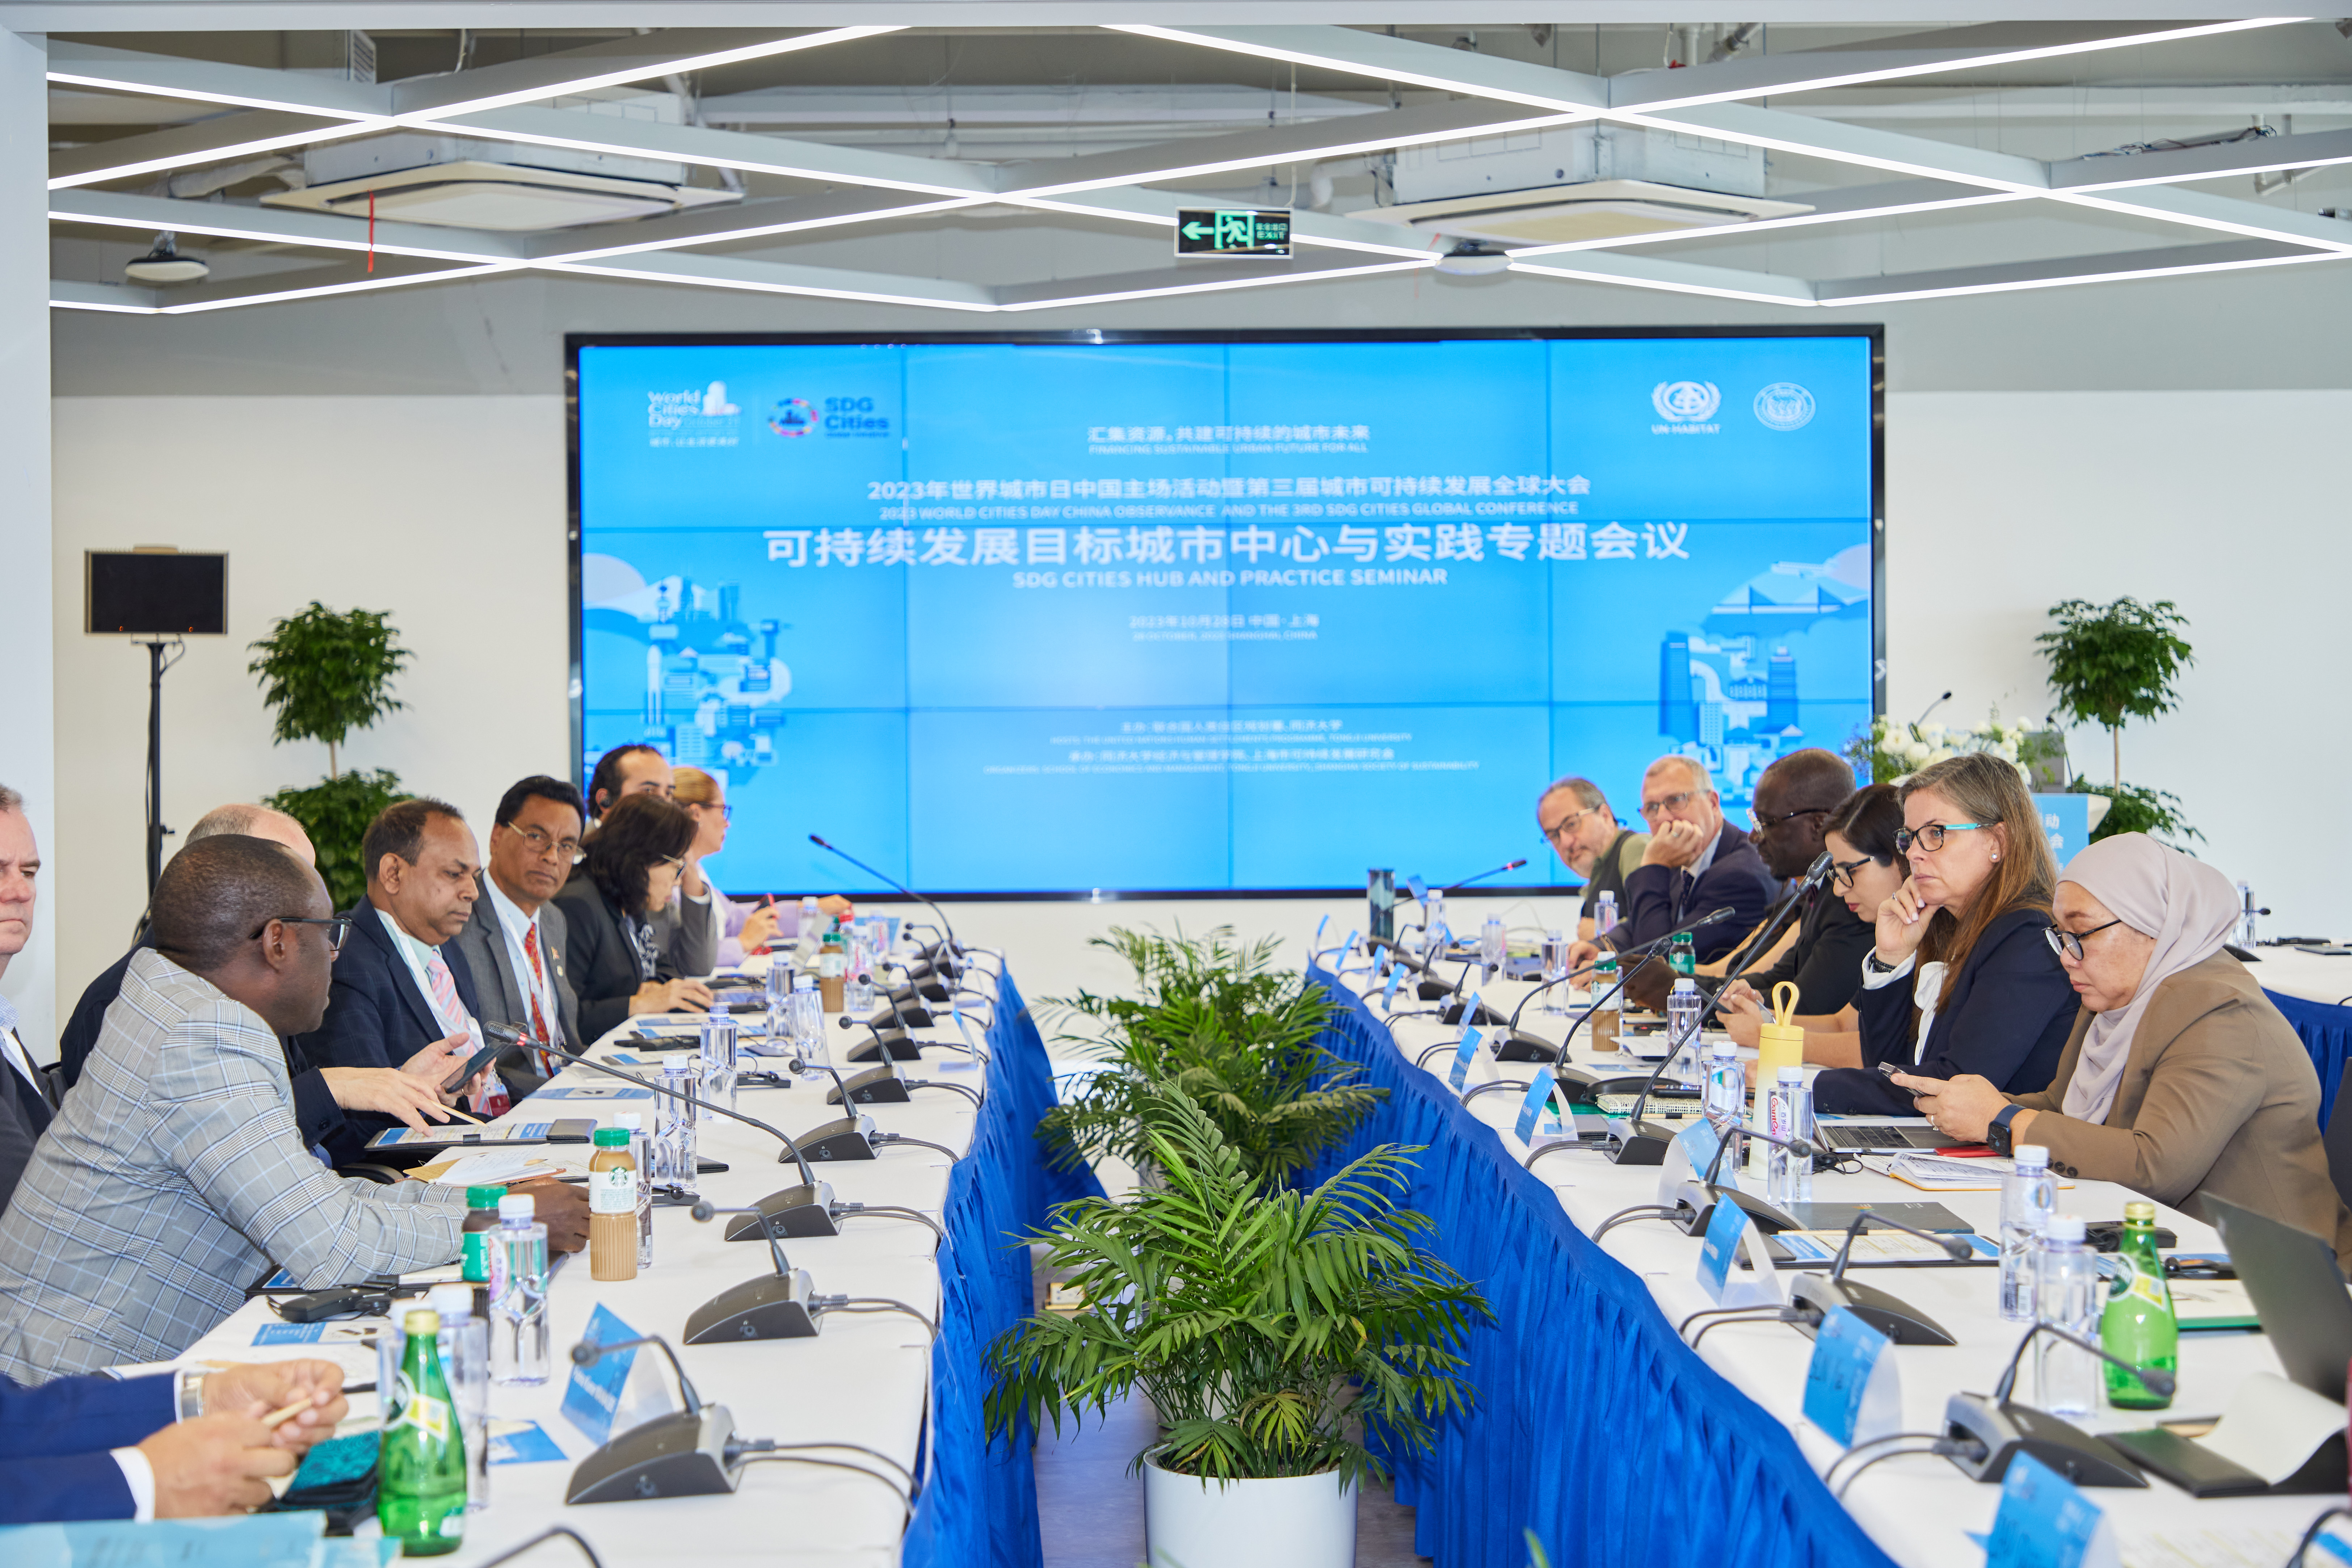 Guests Home and Abroad Gathered in Tongji SEM to Discuss Sustainable Urban Development